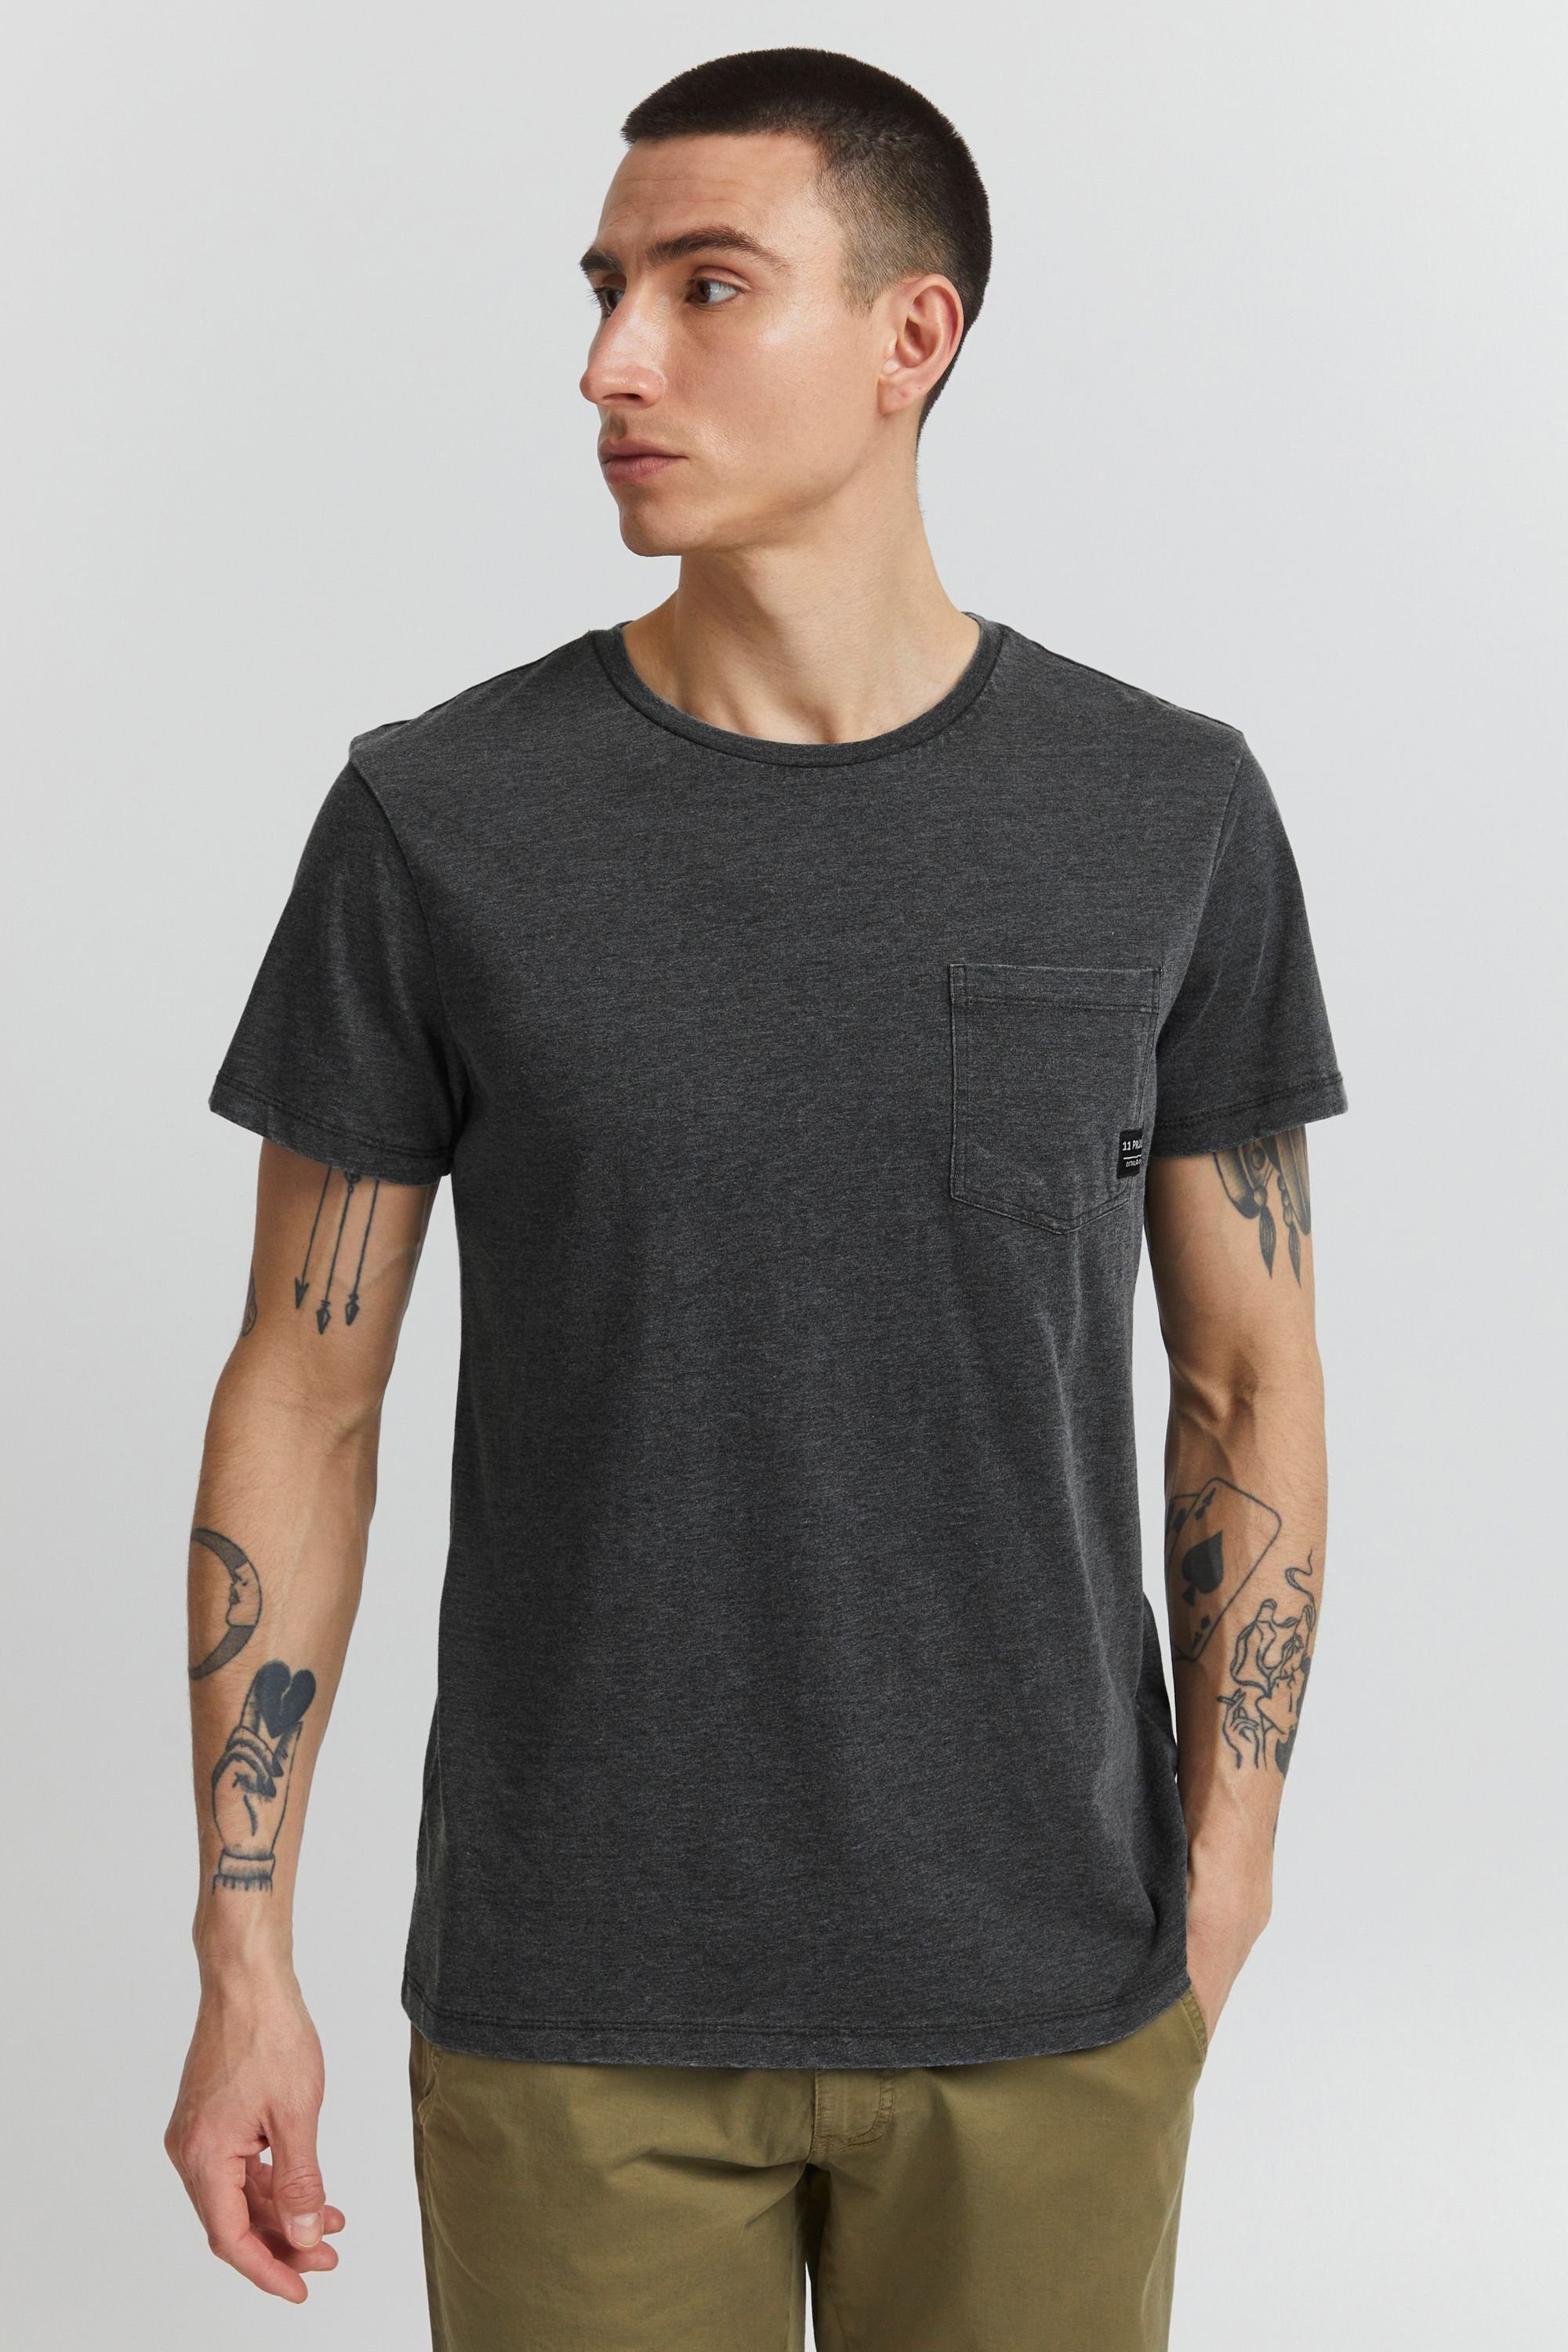 11 11 Project Project PRLewi T-Shirt Black